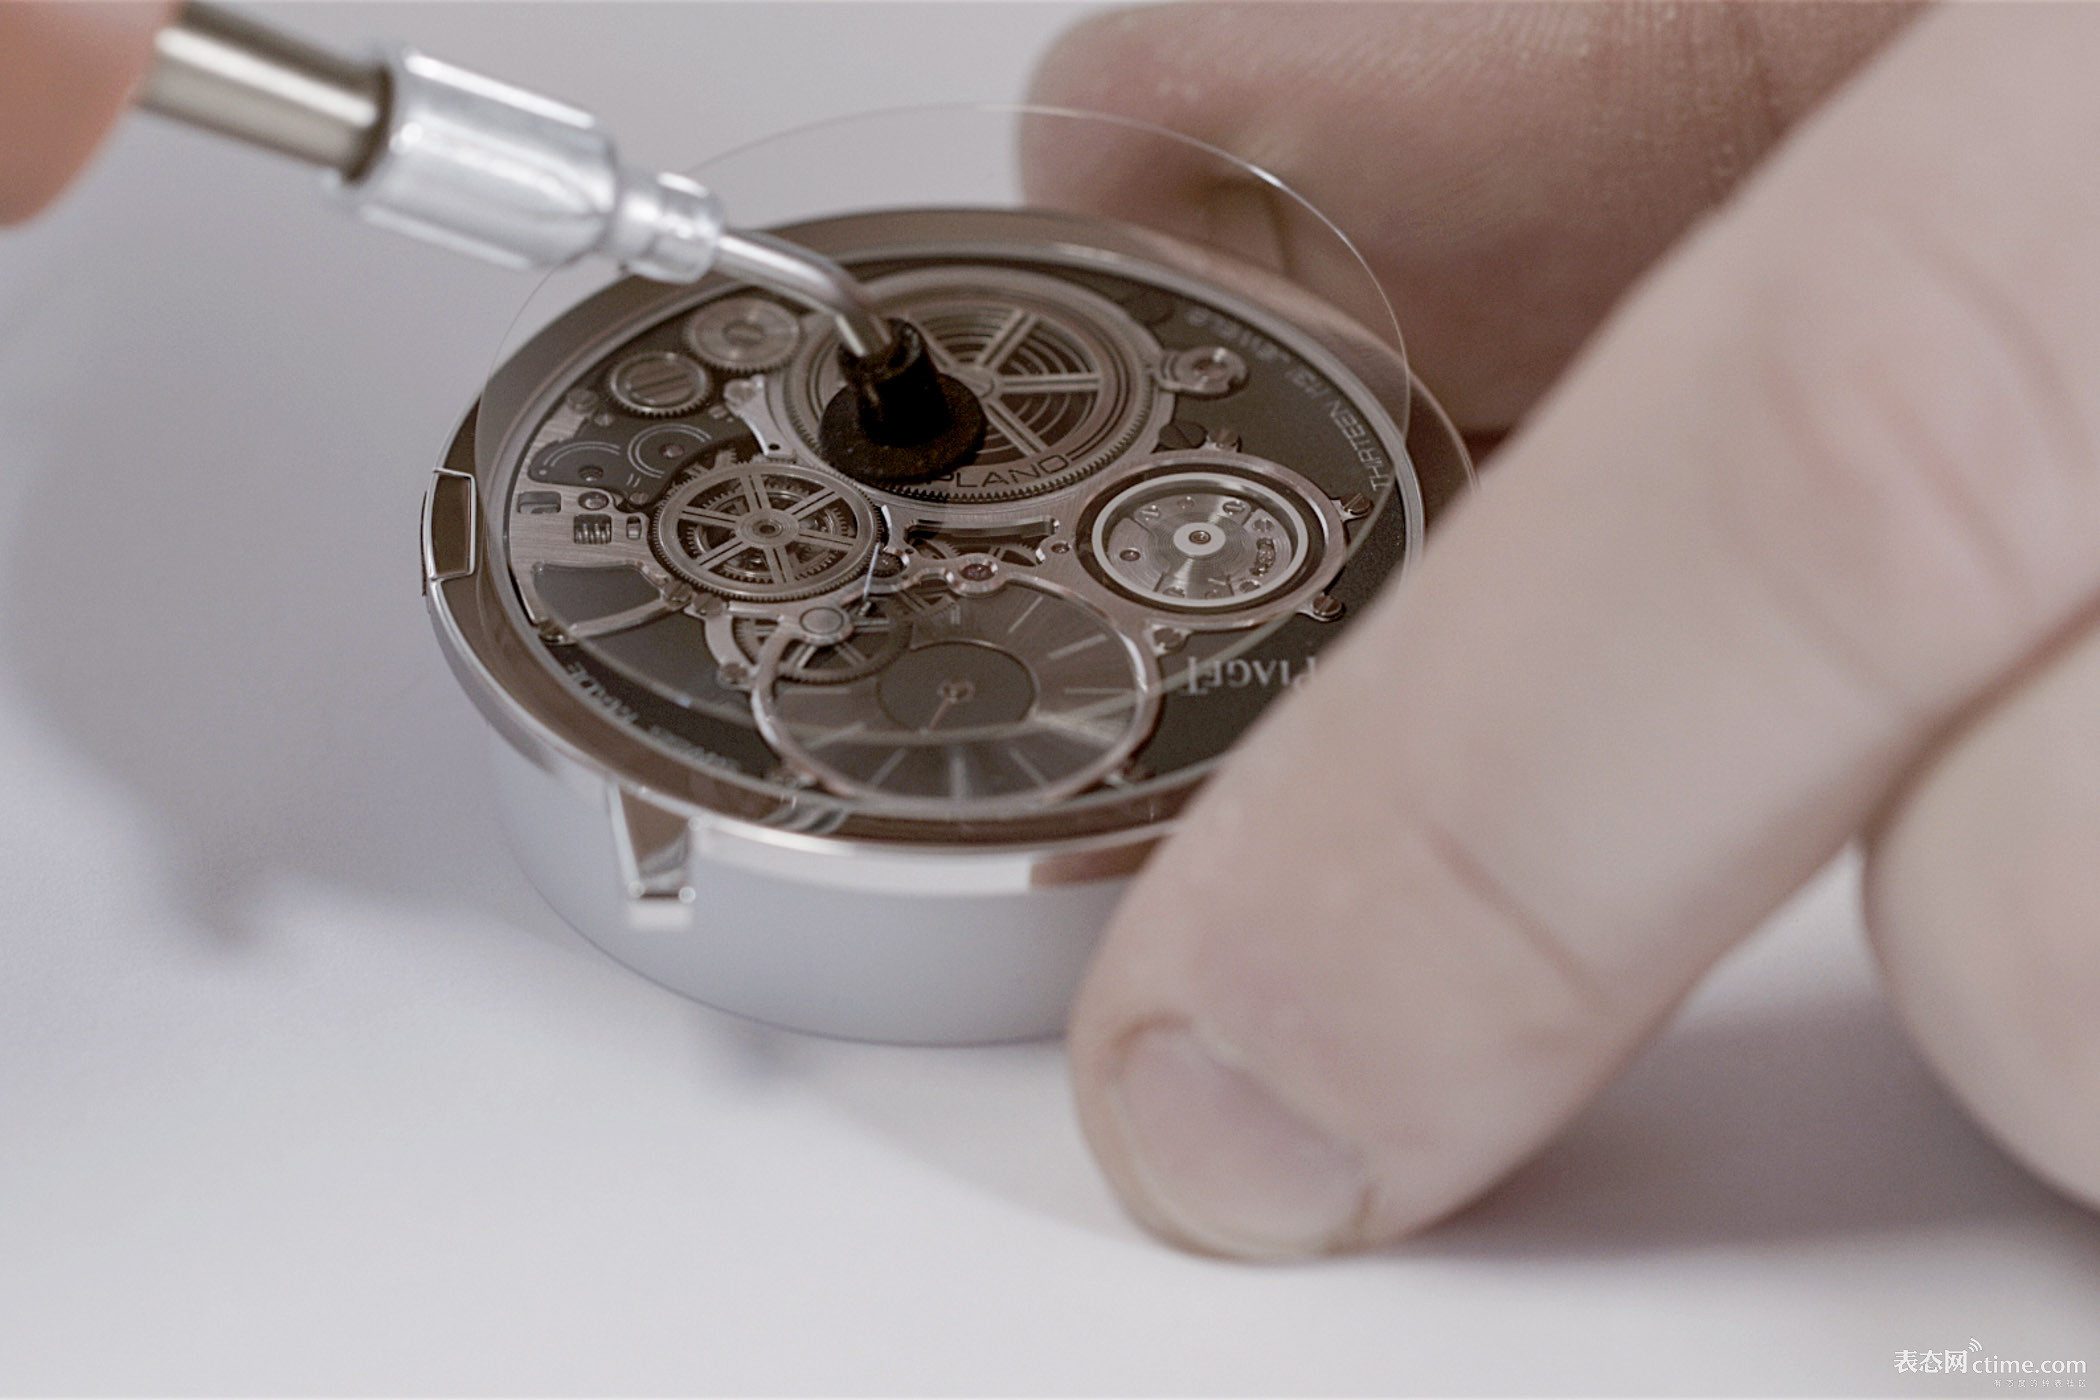 Piaget-Altiplano-Ultimate-Concept-thinnest-mechanical-watch-in-the-world-2mm-1.jpg